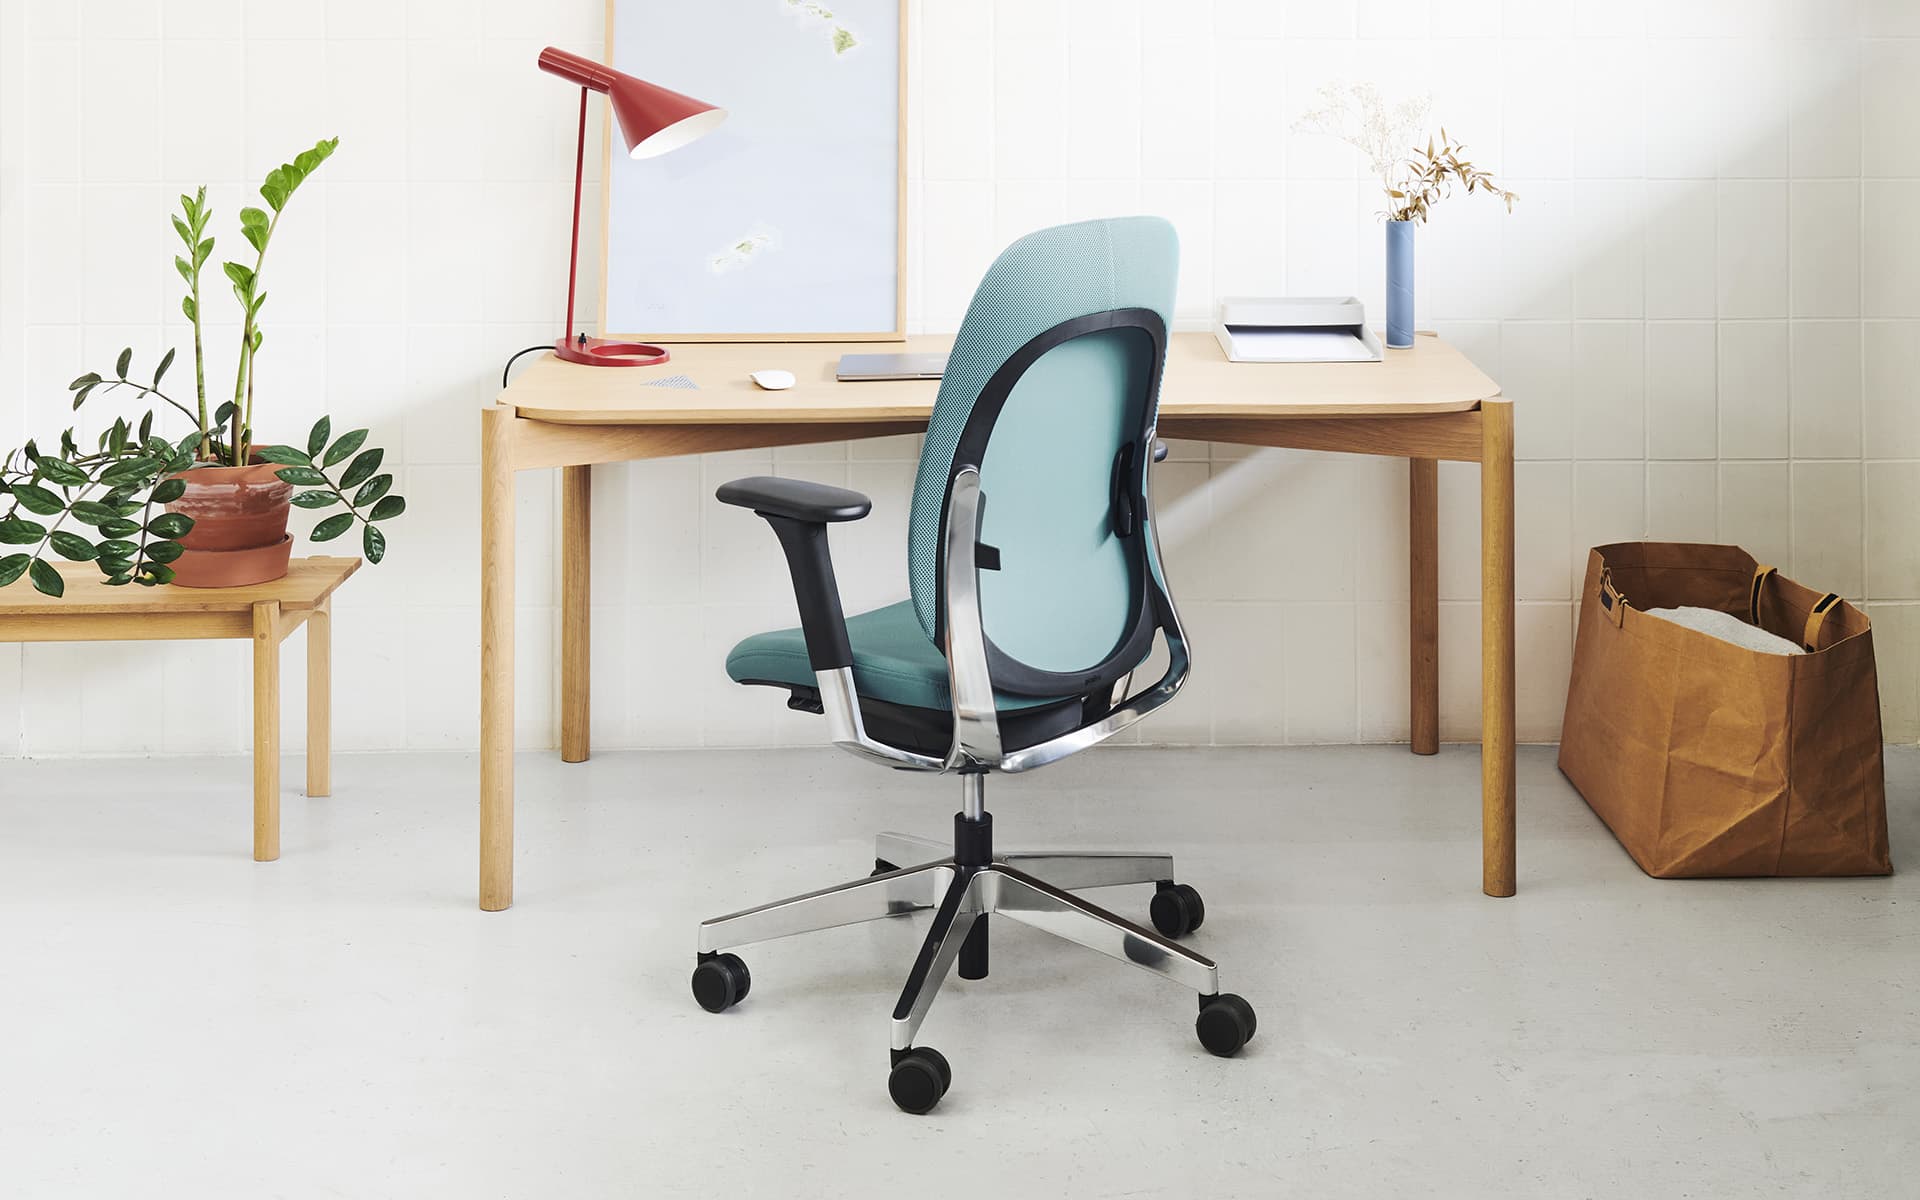 Flokk Giroflex 40 office chair by ITO Design with turquoise upholstery at a homely workstation – back view